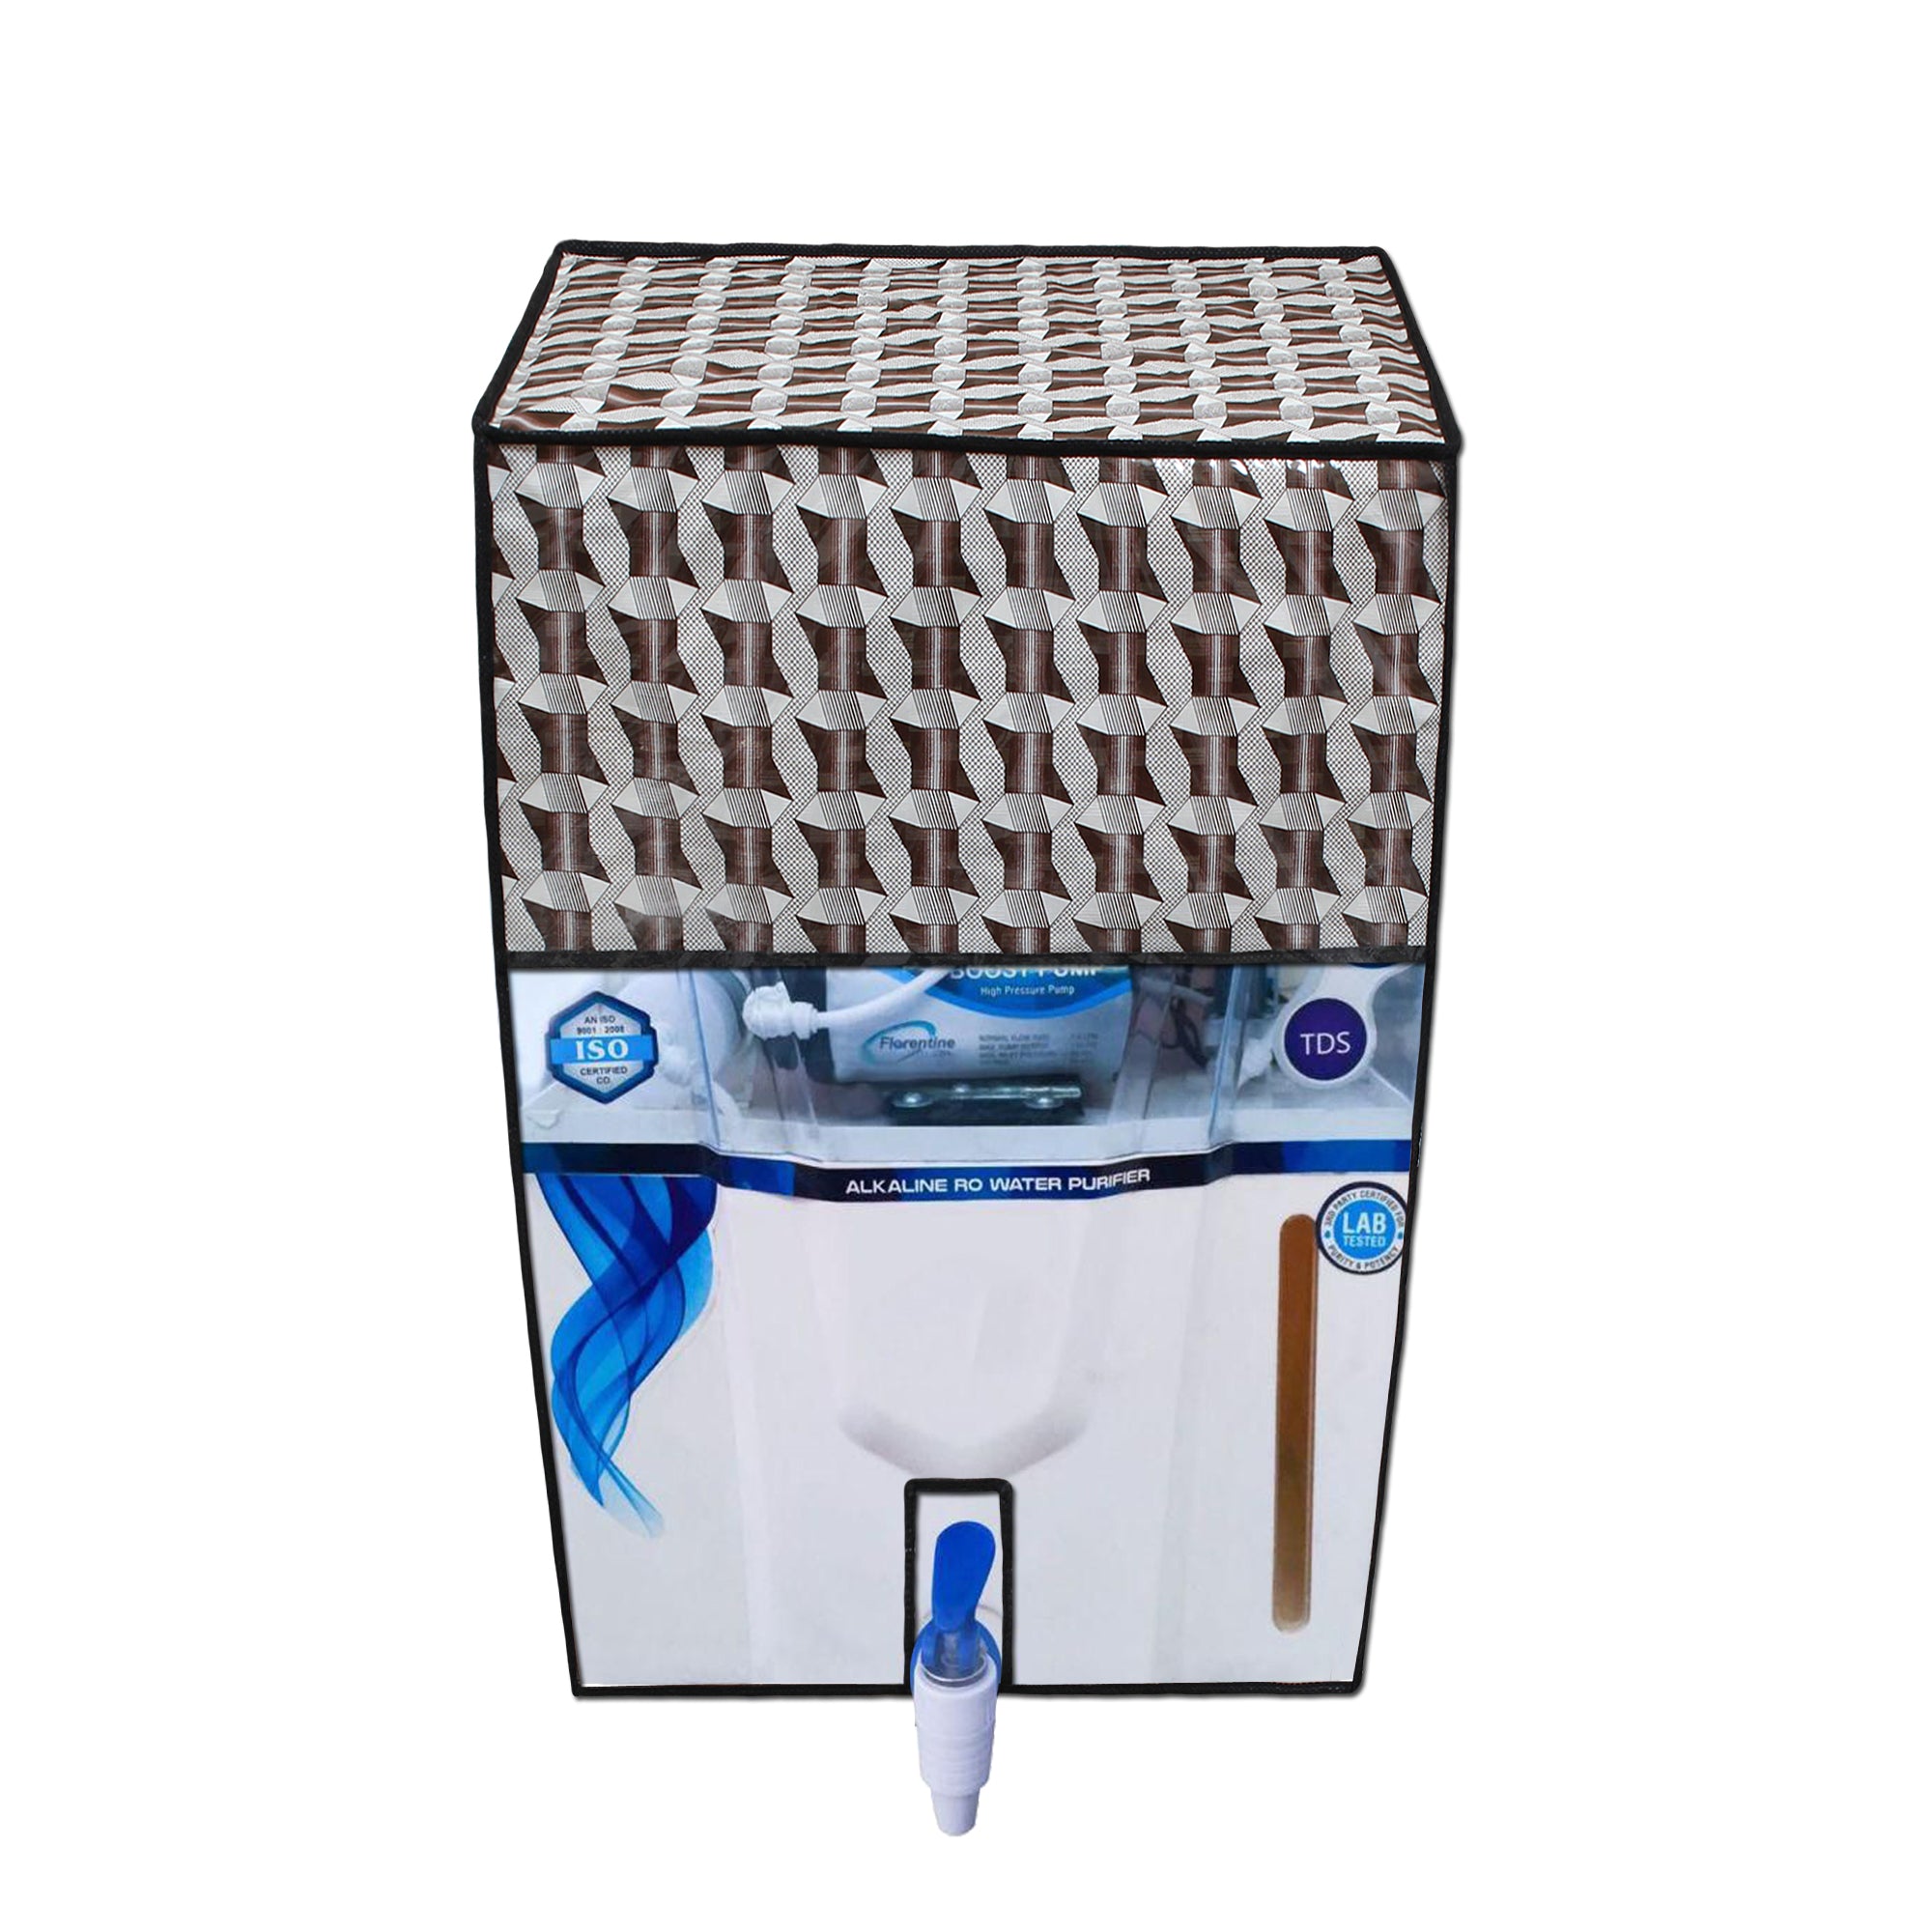 Waterproof & Dustproof Water Purifier RO Cover, SA09 - Dream Care Furnishings Private Limited